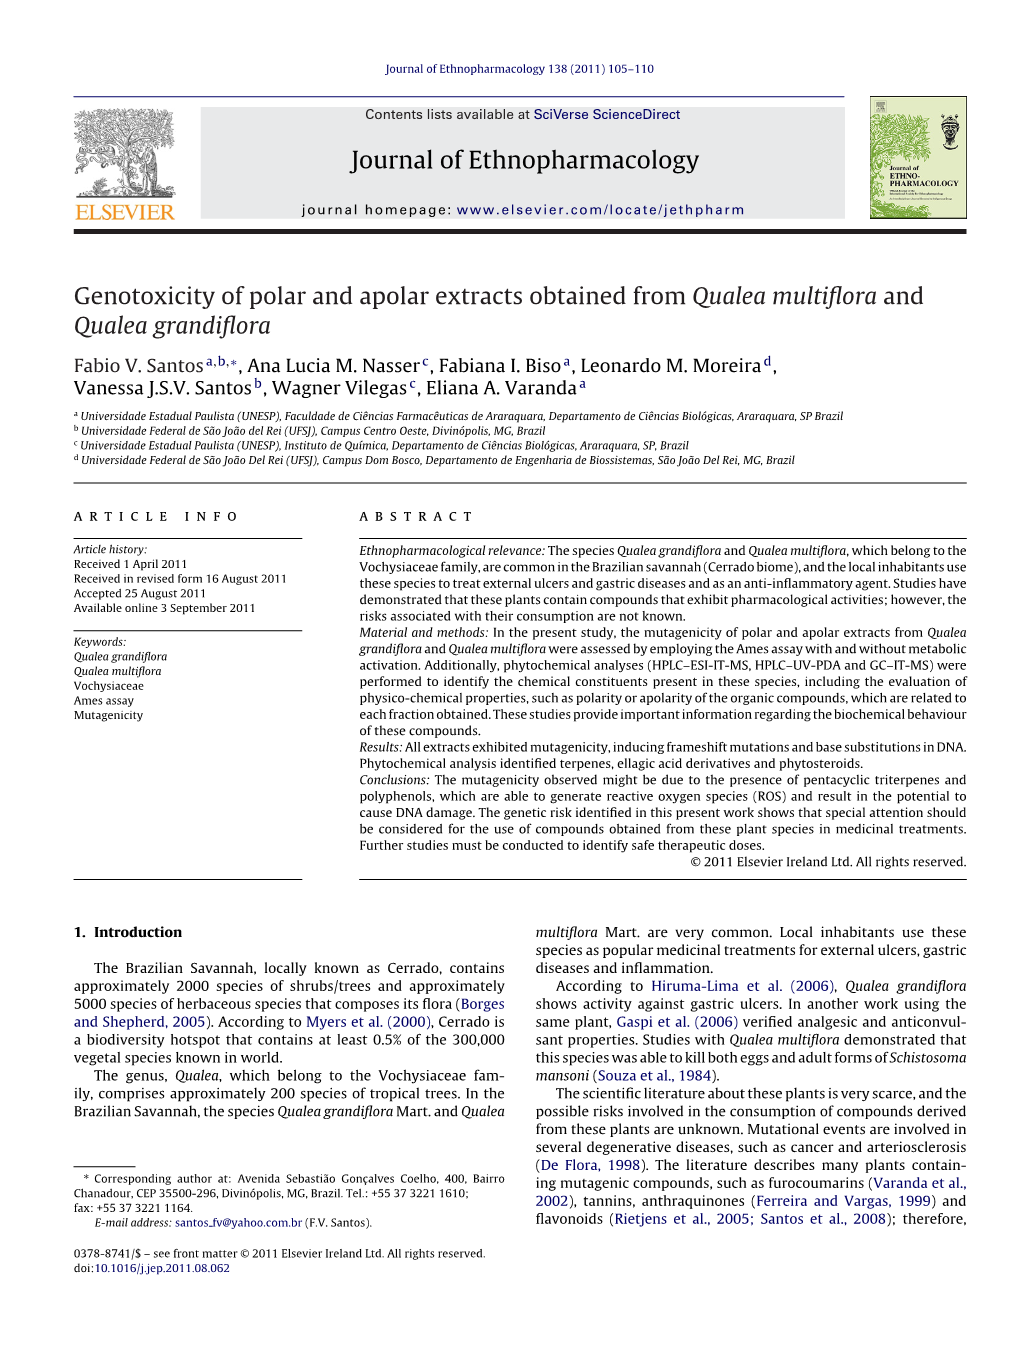 Genotoxicity of Polar and Apolar Extracts Obtained from Qualea Multiﬂora And